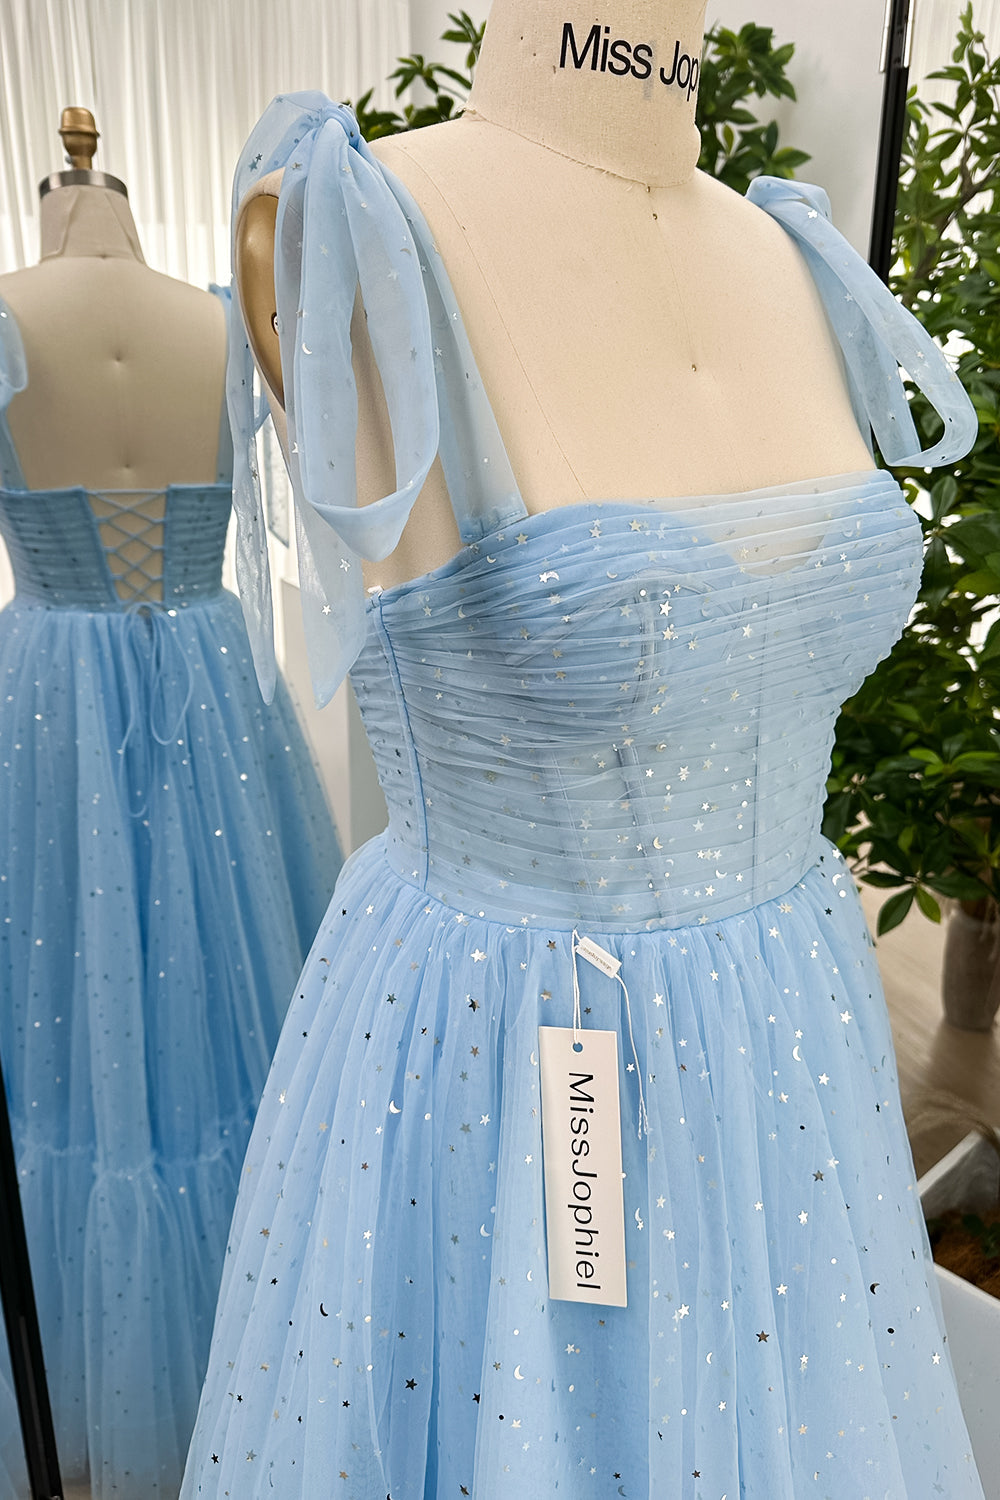 Corset Tulle Stars Sky Blue Long Dress with Tie Bow Straps